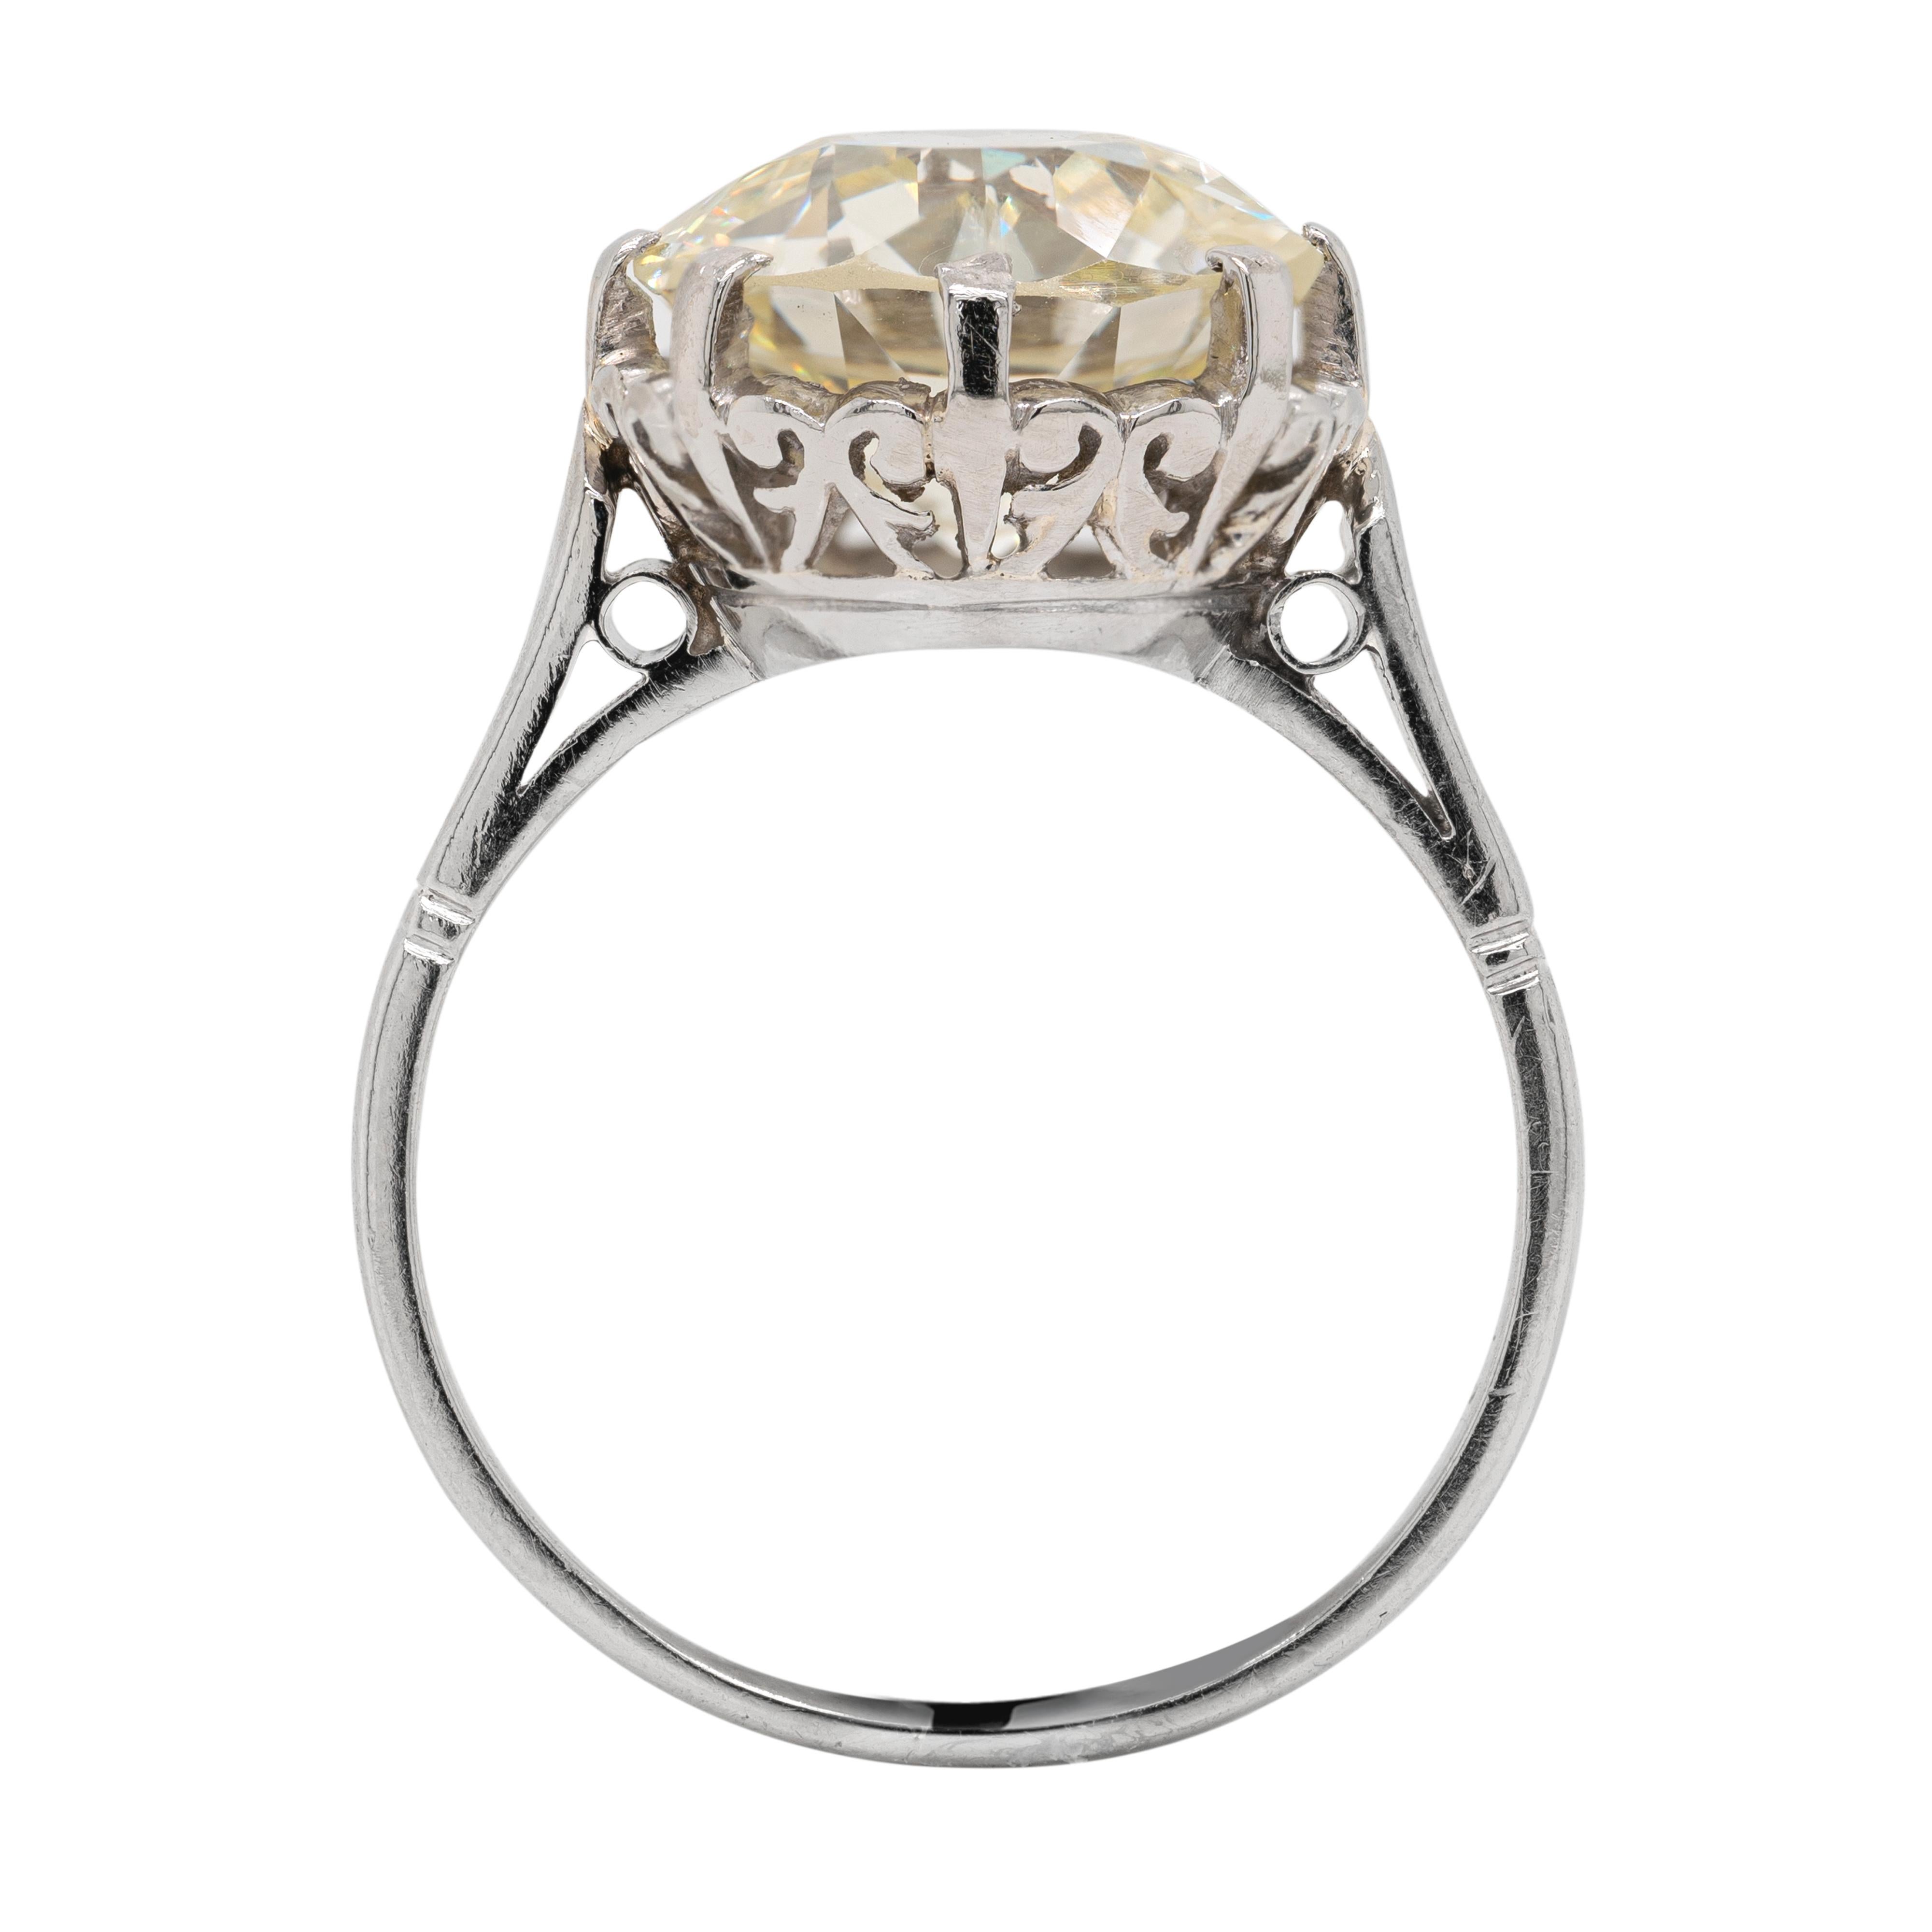 This magnificent antique solitaire engagement ring features an old European cut diamond weighing 4.29 carats, mounted in an intricate open work crown eight claw illusion setting. The impressive Edwardian cut stone is set in its original late 1920's